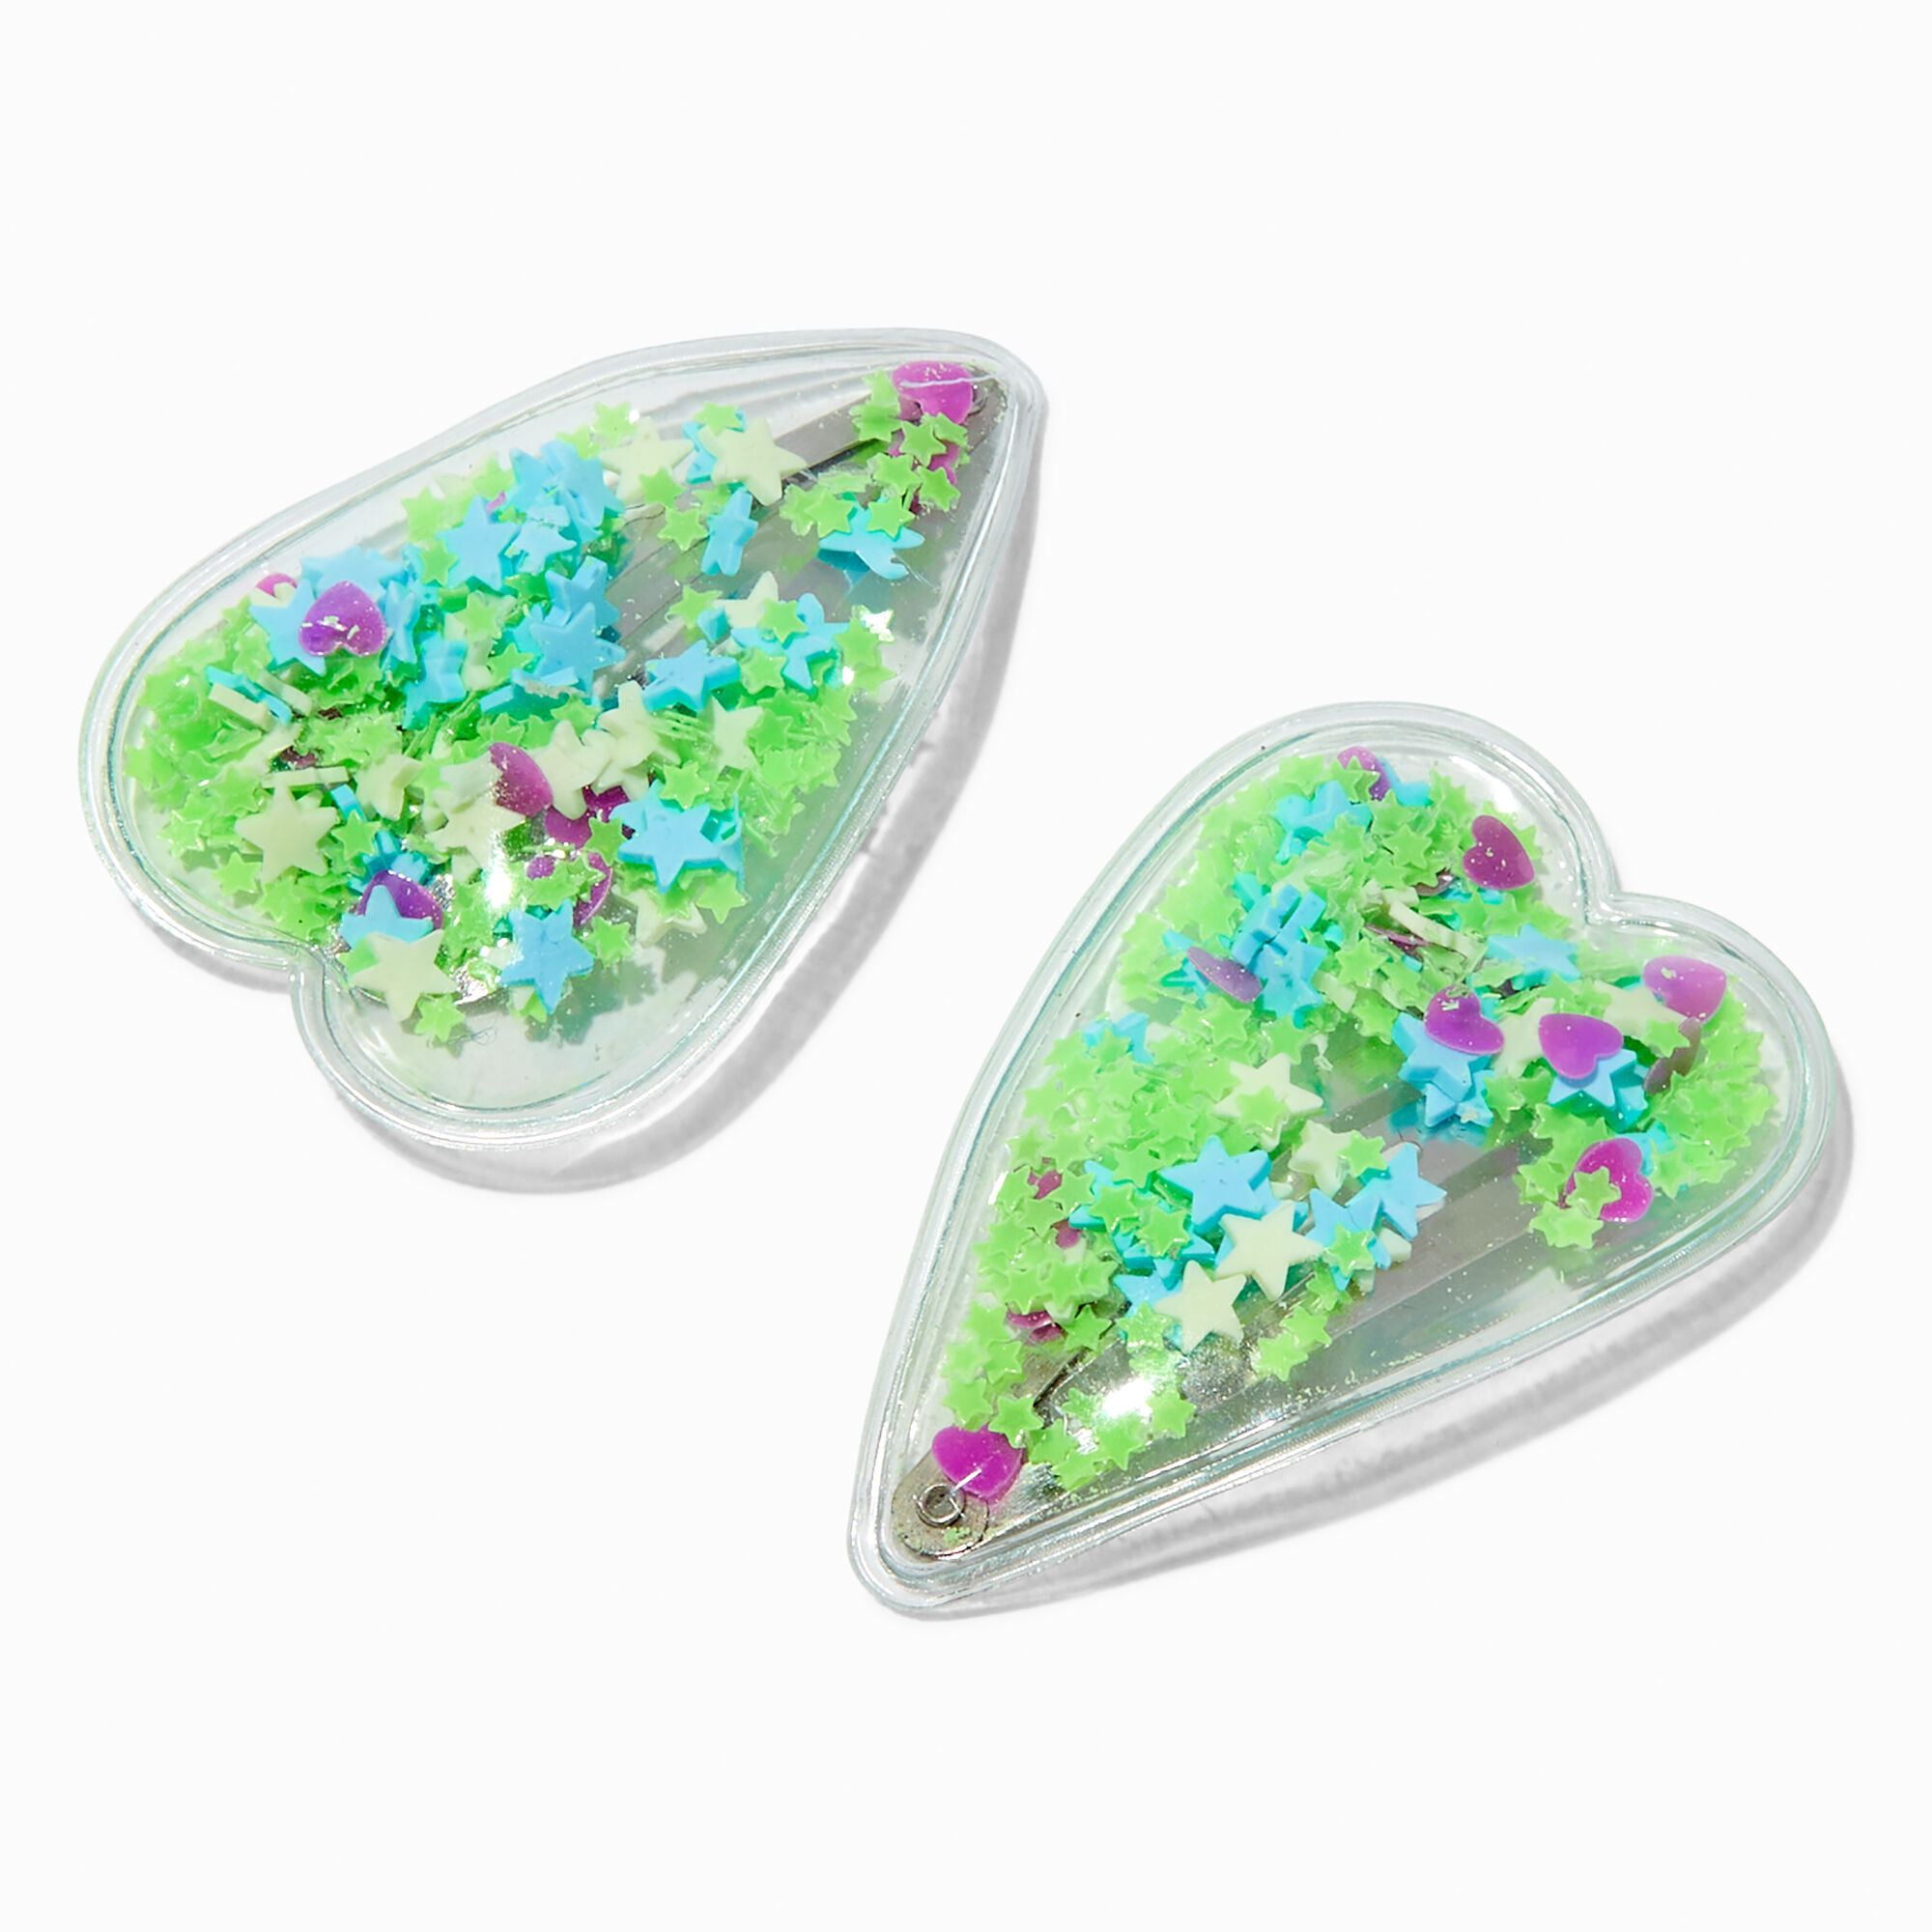 View Claires Club Shaker Heart Snap Hair Clips 2 Pack Green information